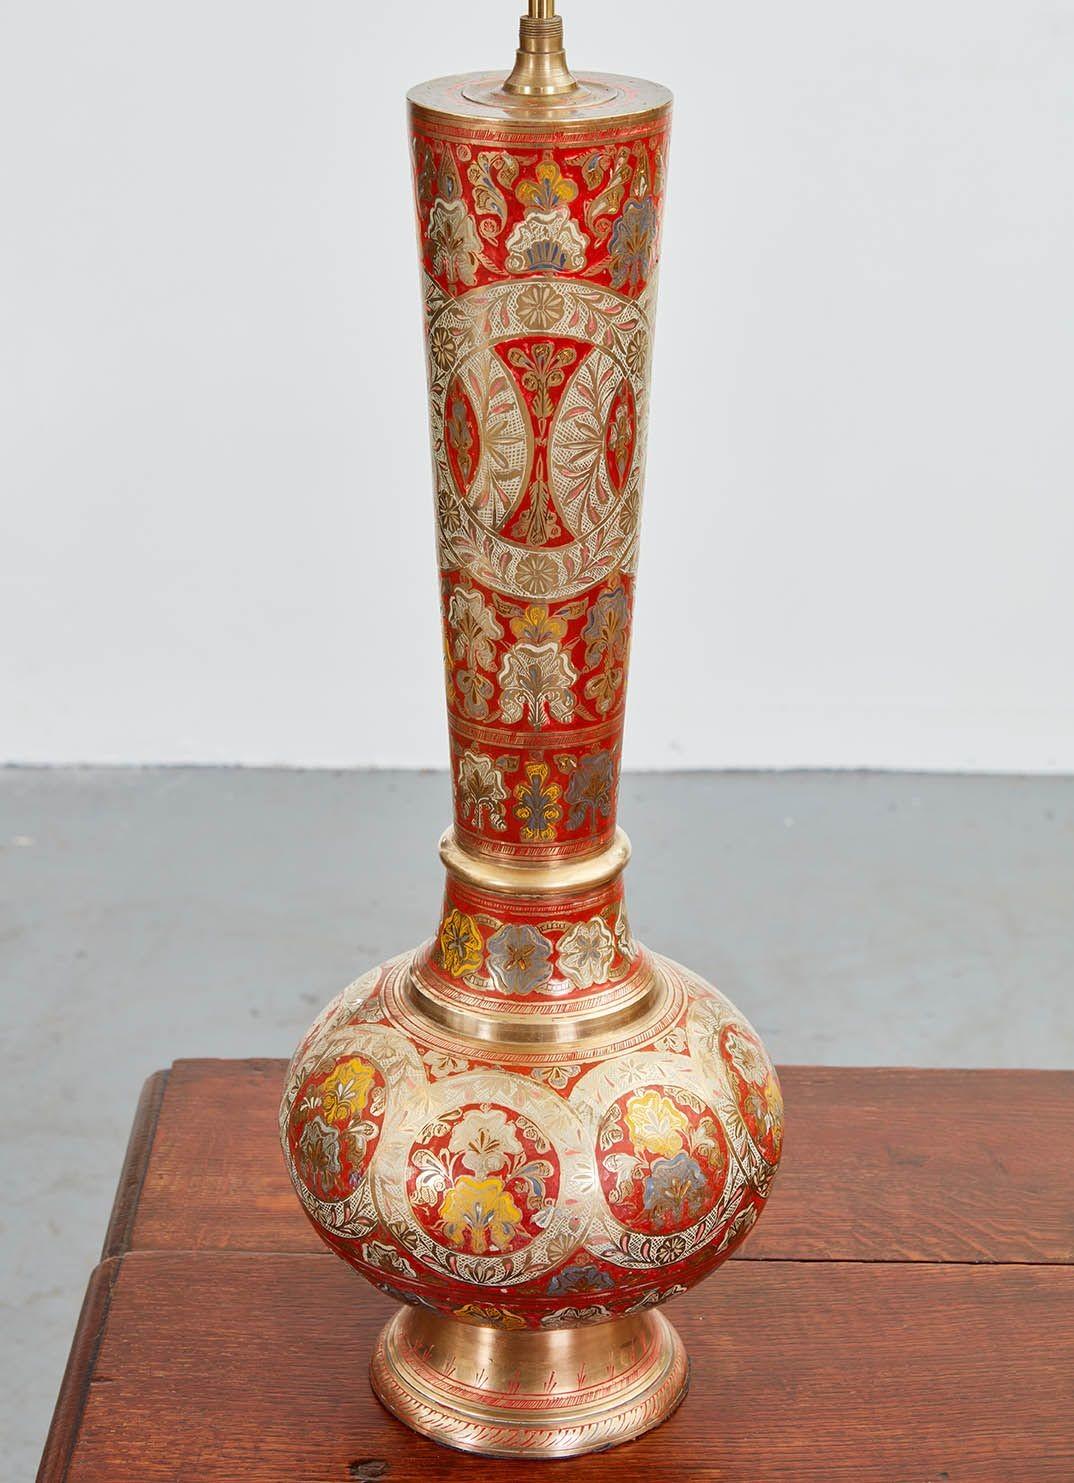 Two wonderful and unusual Kashmiri brass and polychrome enamel vases having floral motifs, one with a scarlet and the other with a sage green ground, now as lamps. Sold without shades.